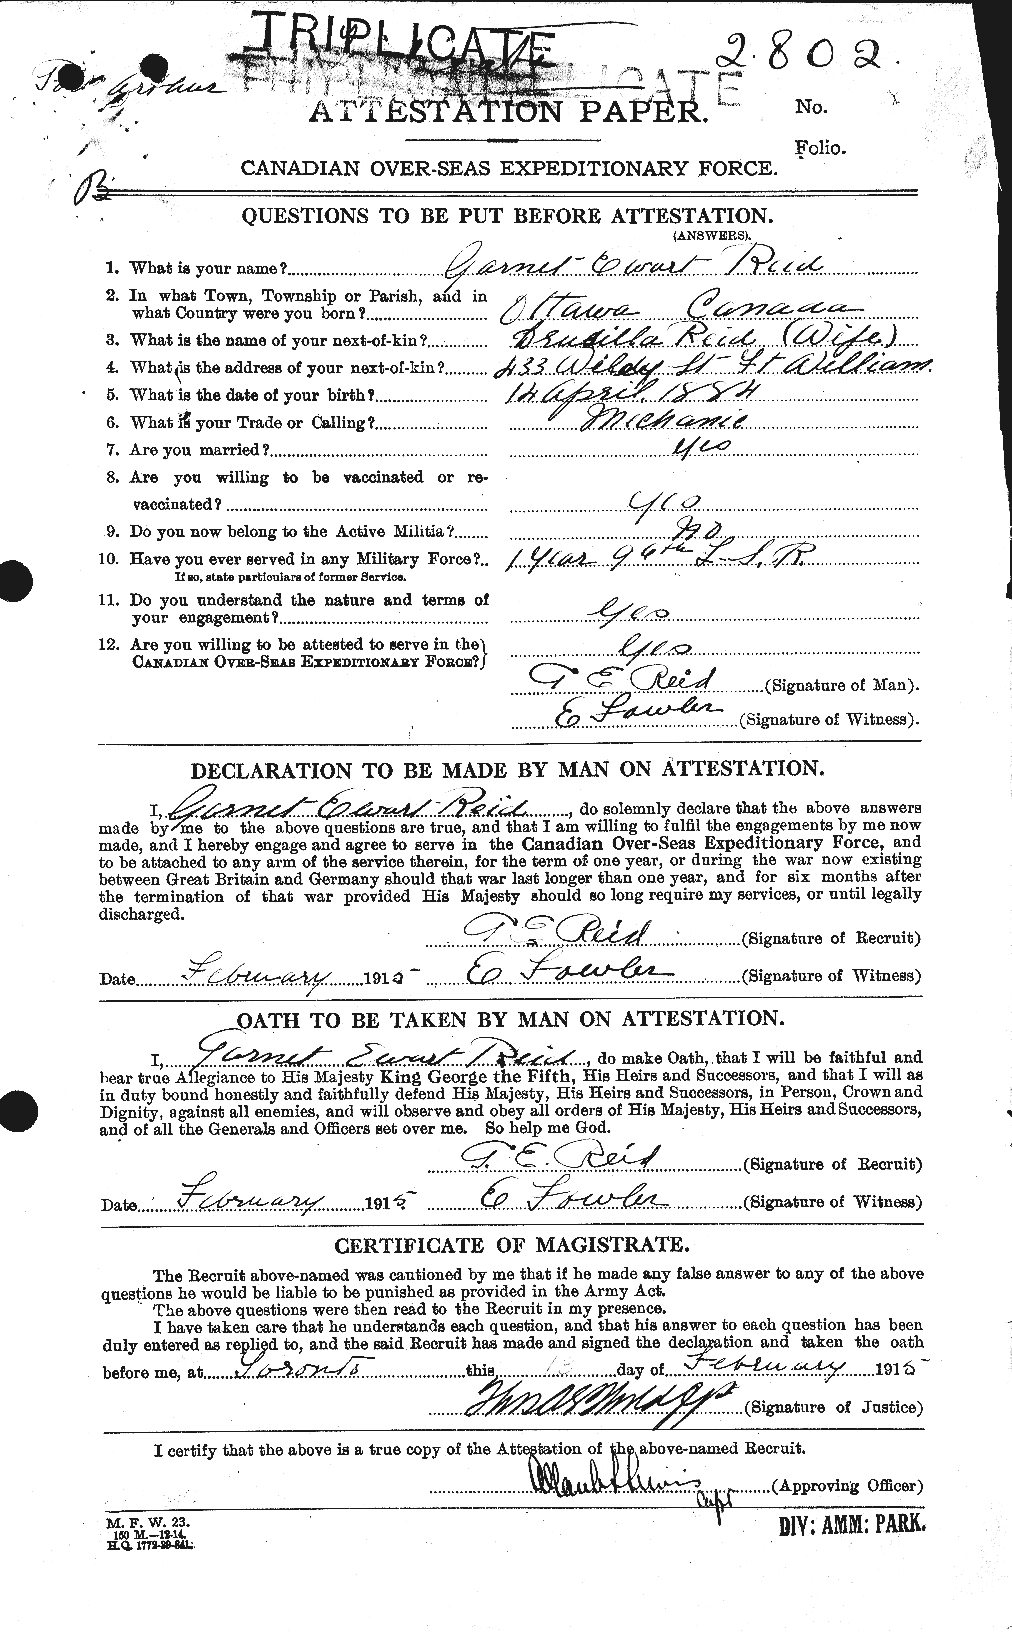 Personnel Records of the First World War - CEF 598077a